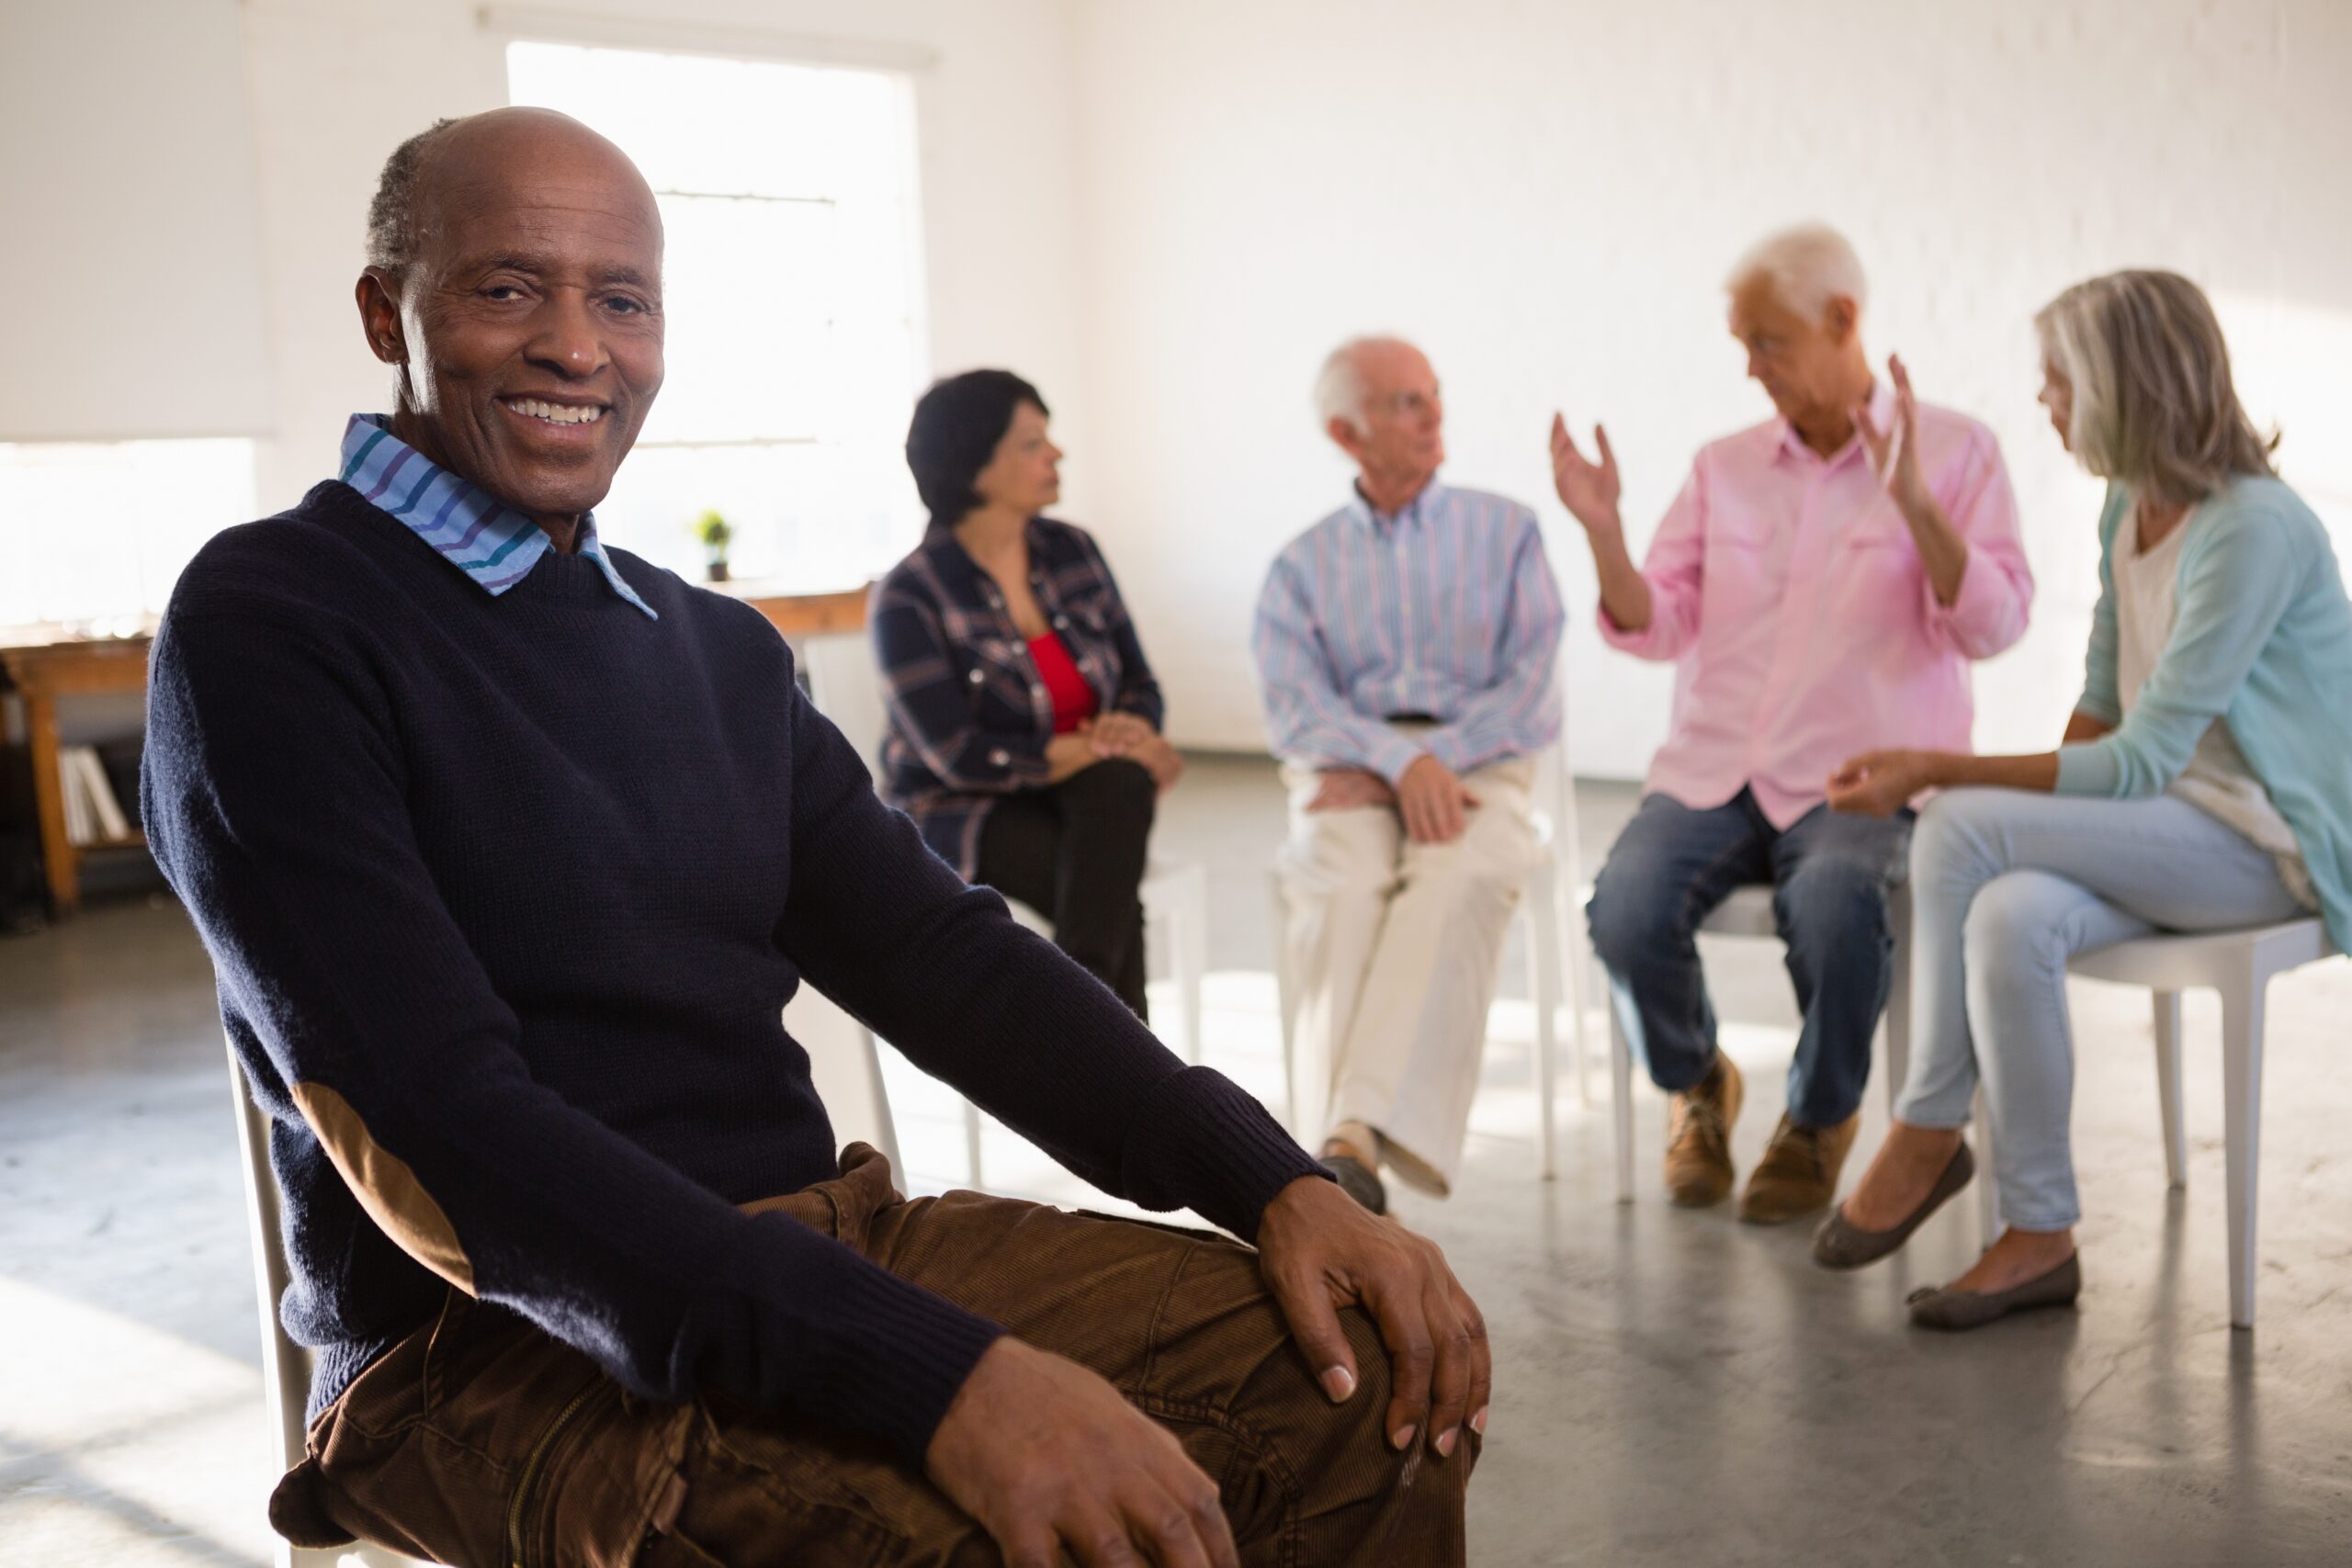 Facts About Older Adults and Mental Health